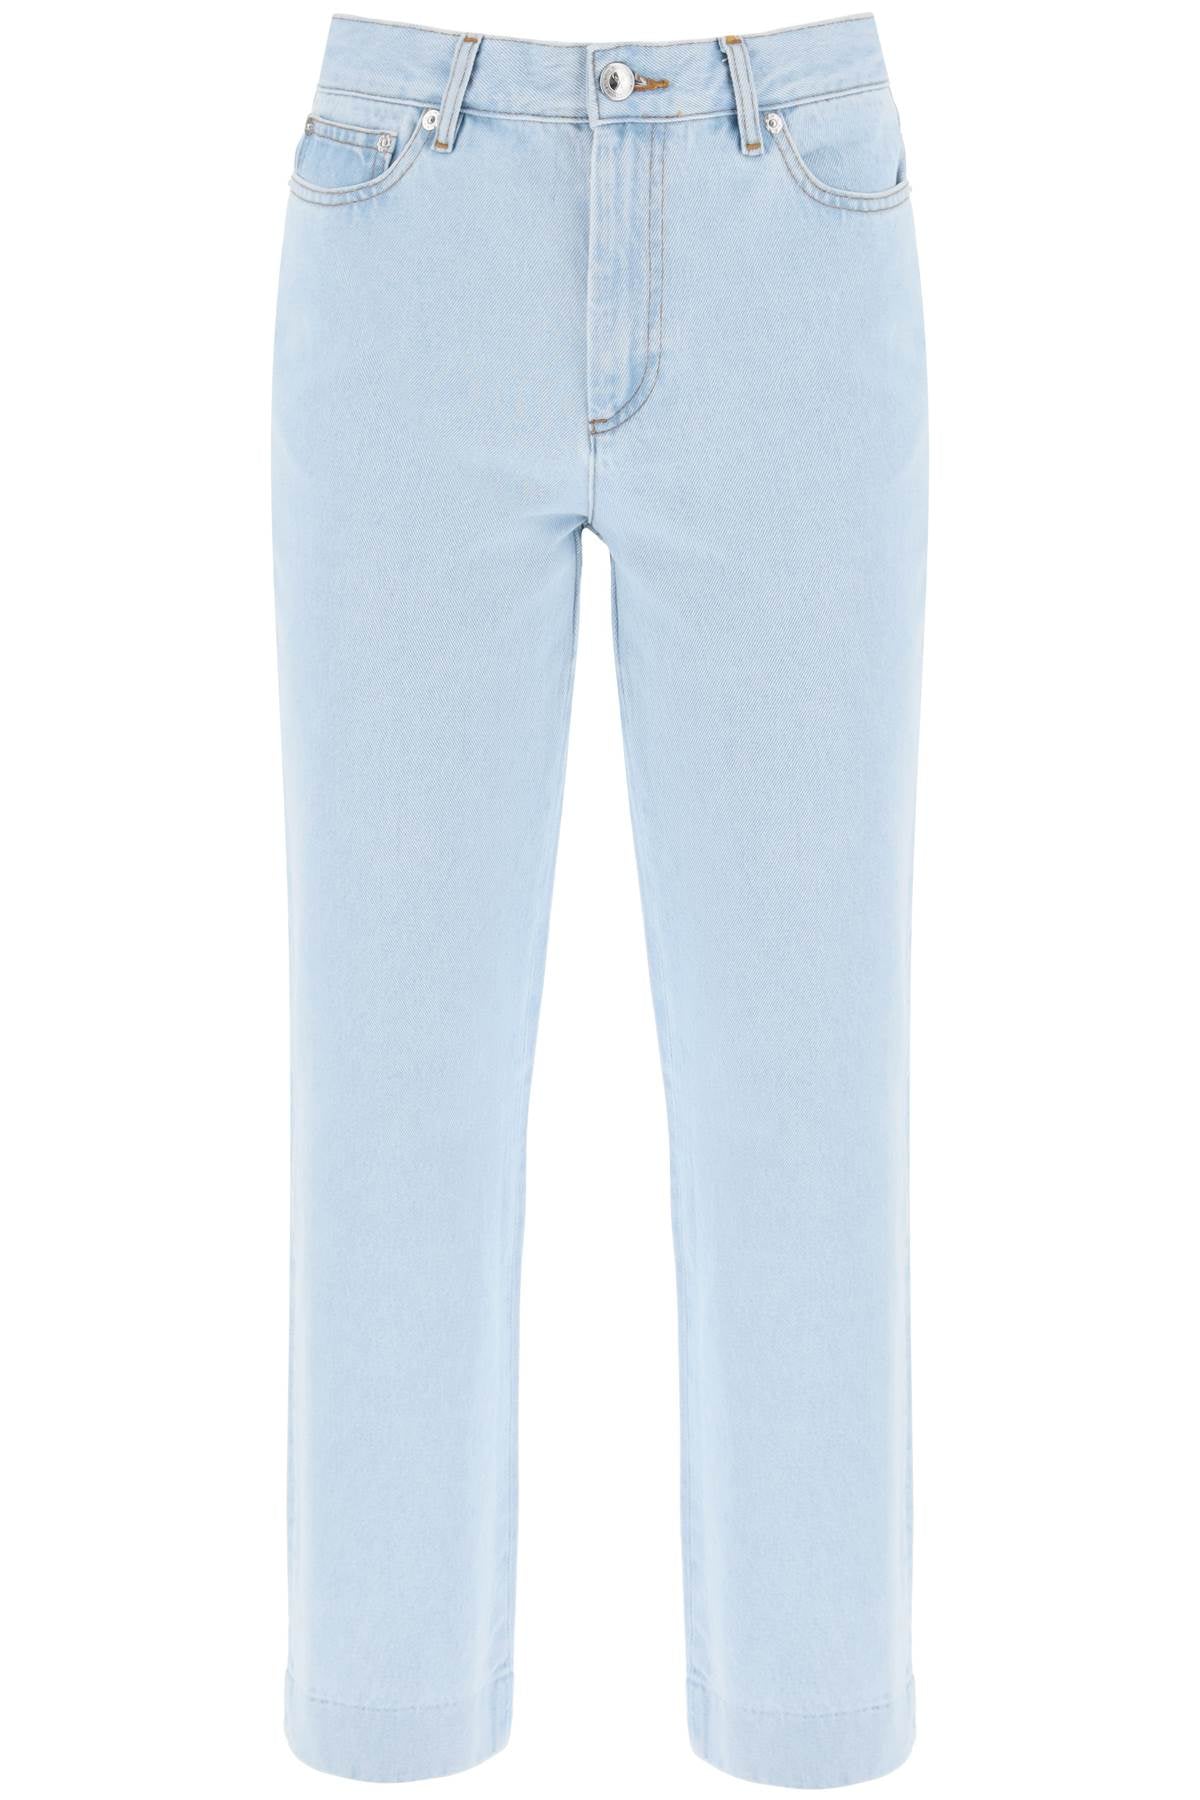 New Sailor Straight Cut Cropped Jeans